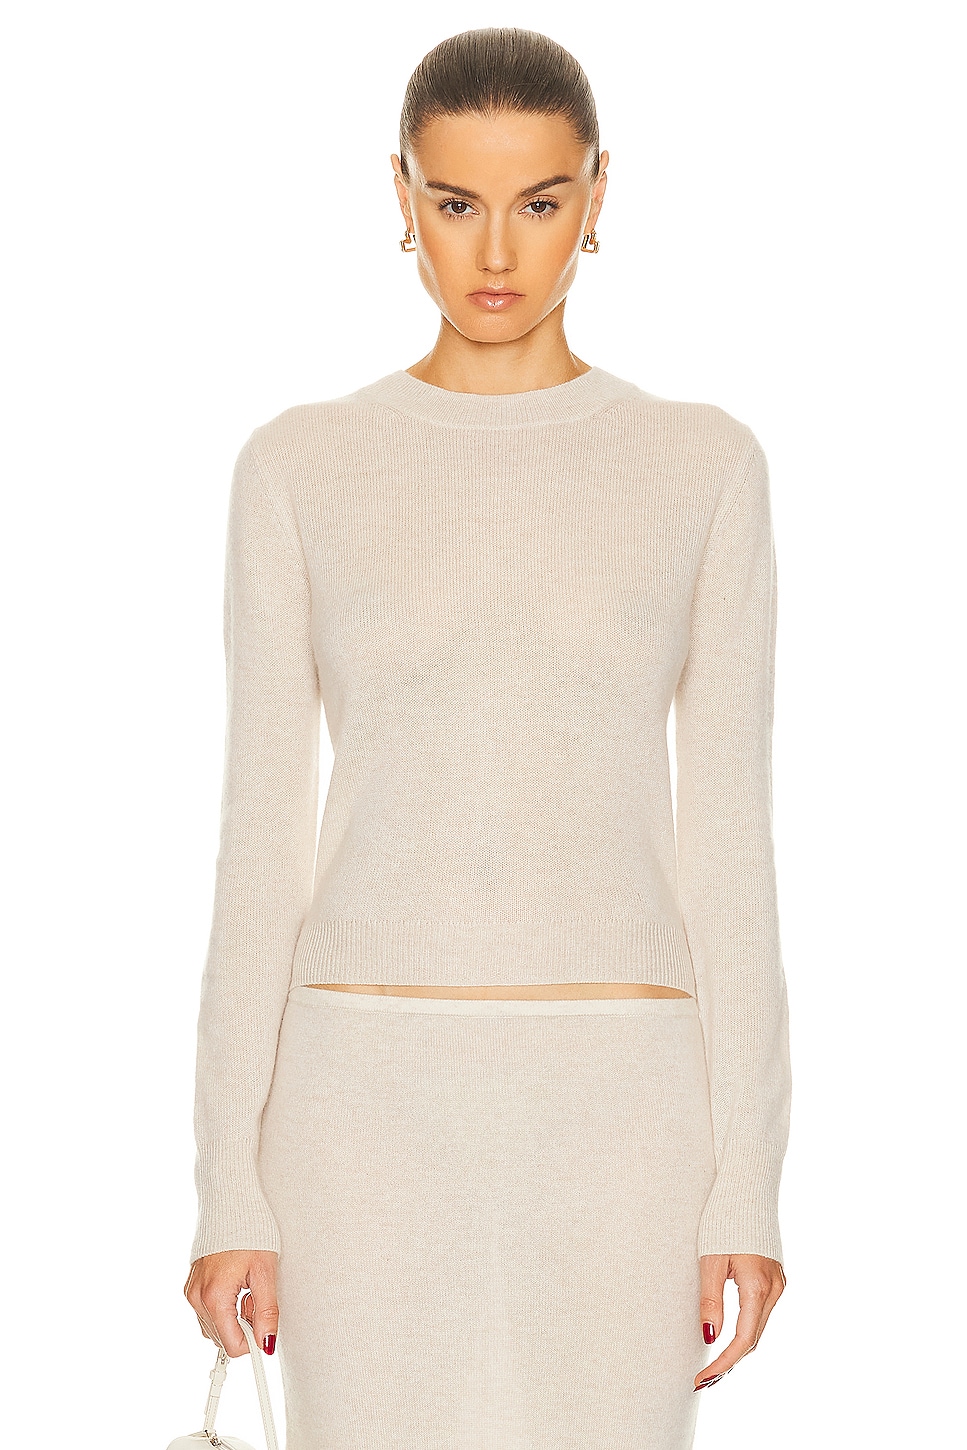 Image 1 of Eterne Francis Sweater in Oatmeal